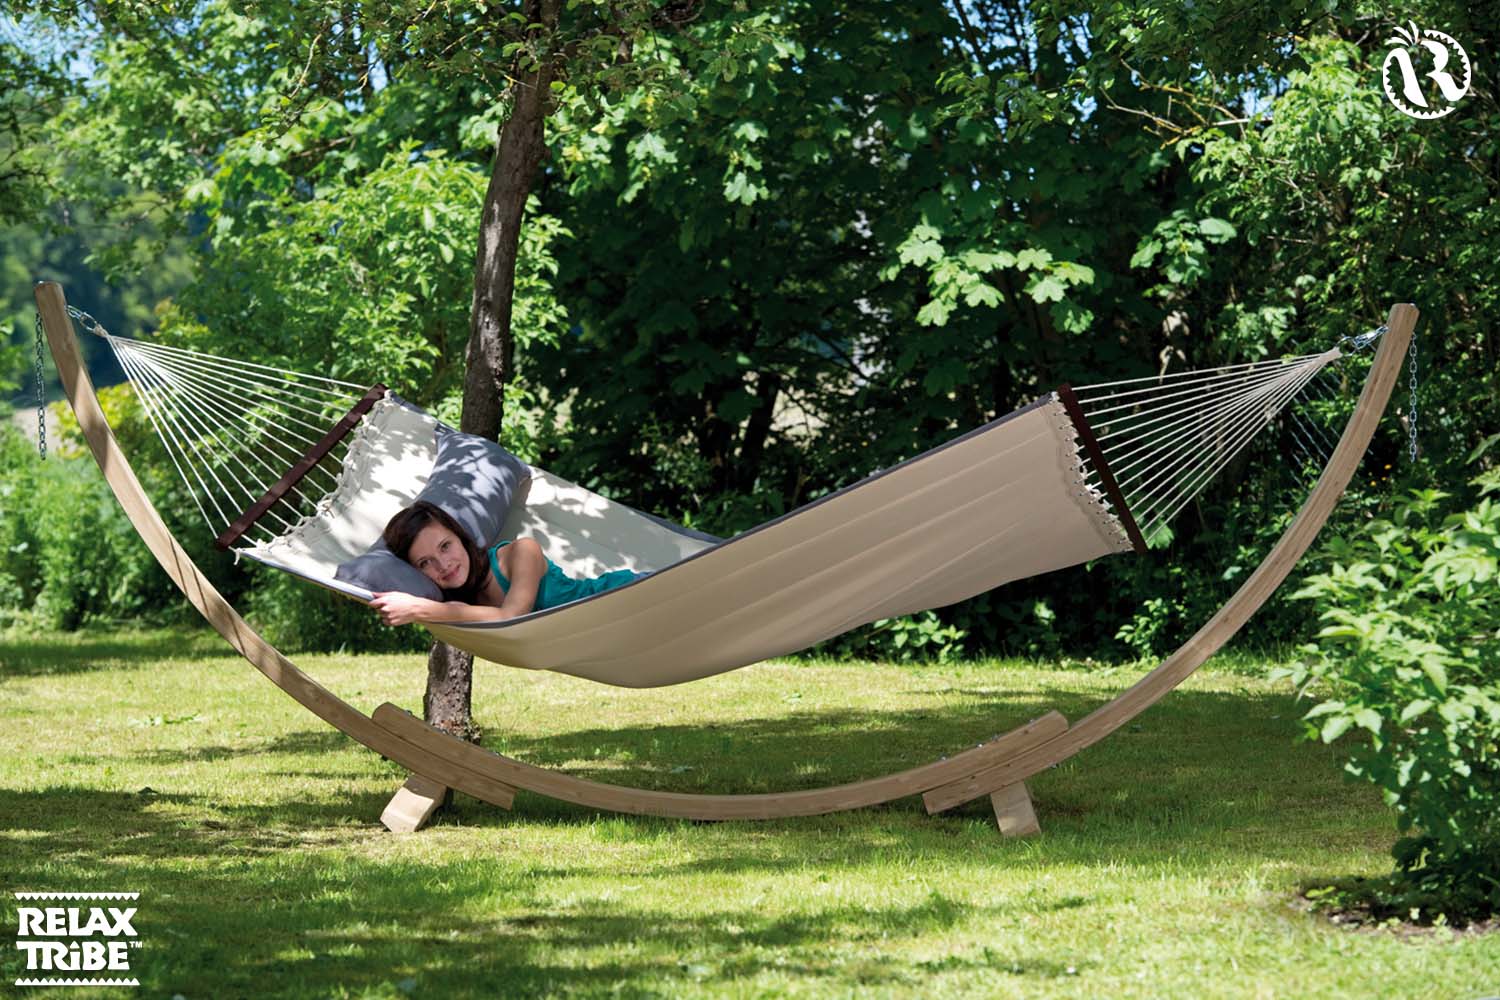 american-dream-sand-double-xl-padded-hammock-with-bars-pillow-beige-grey-garden-wood-stand